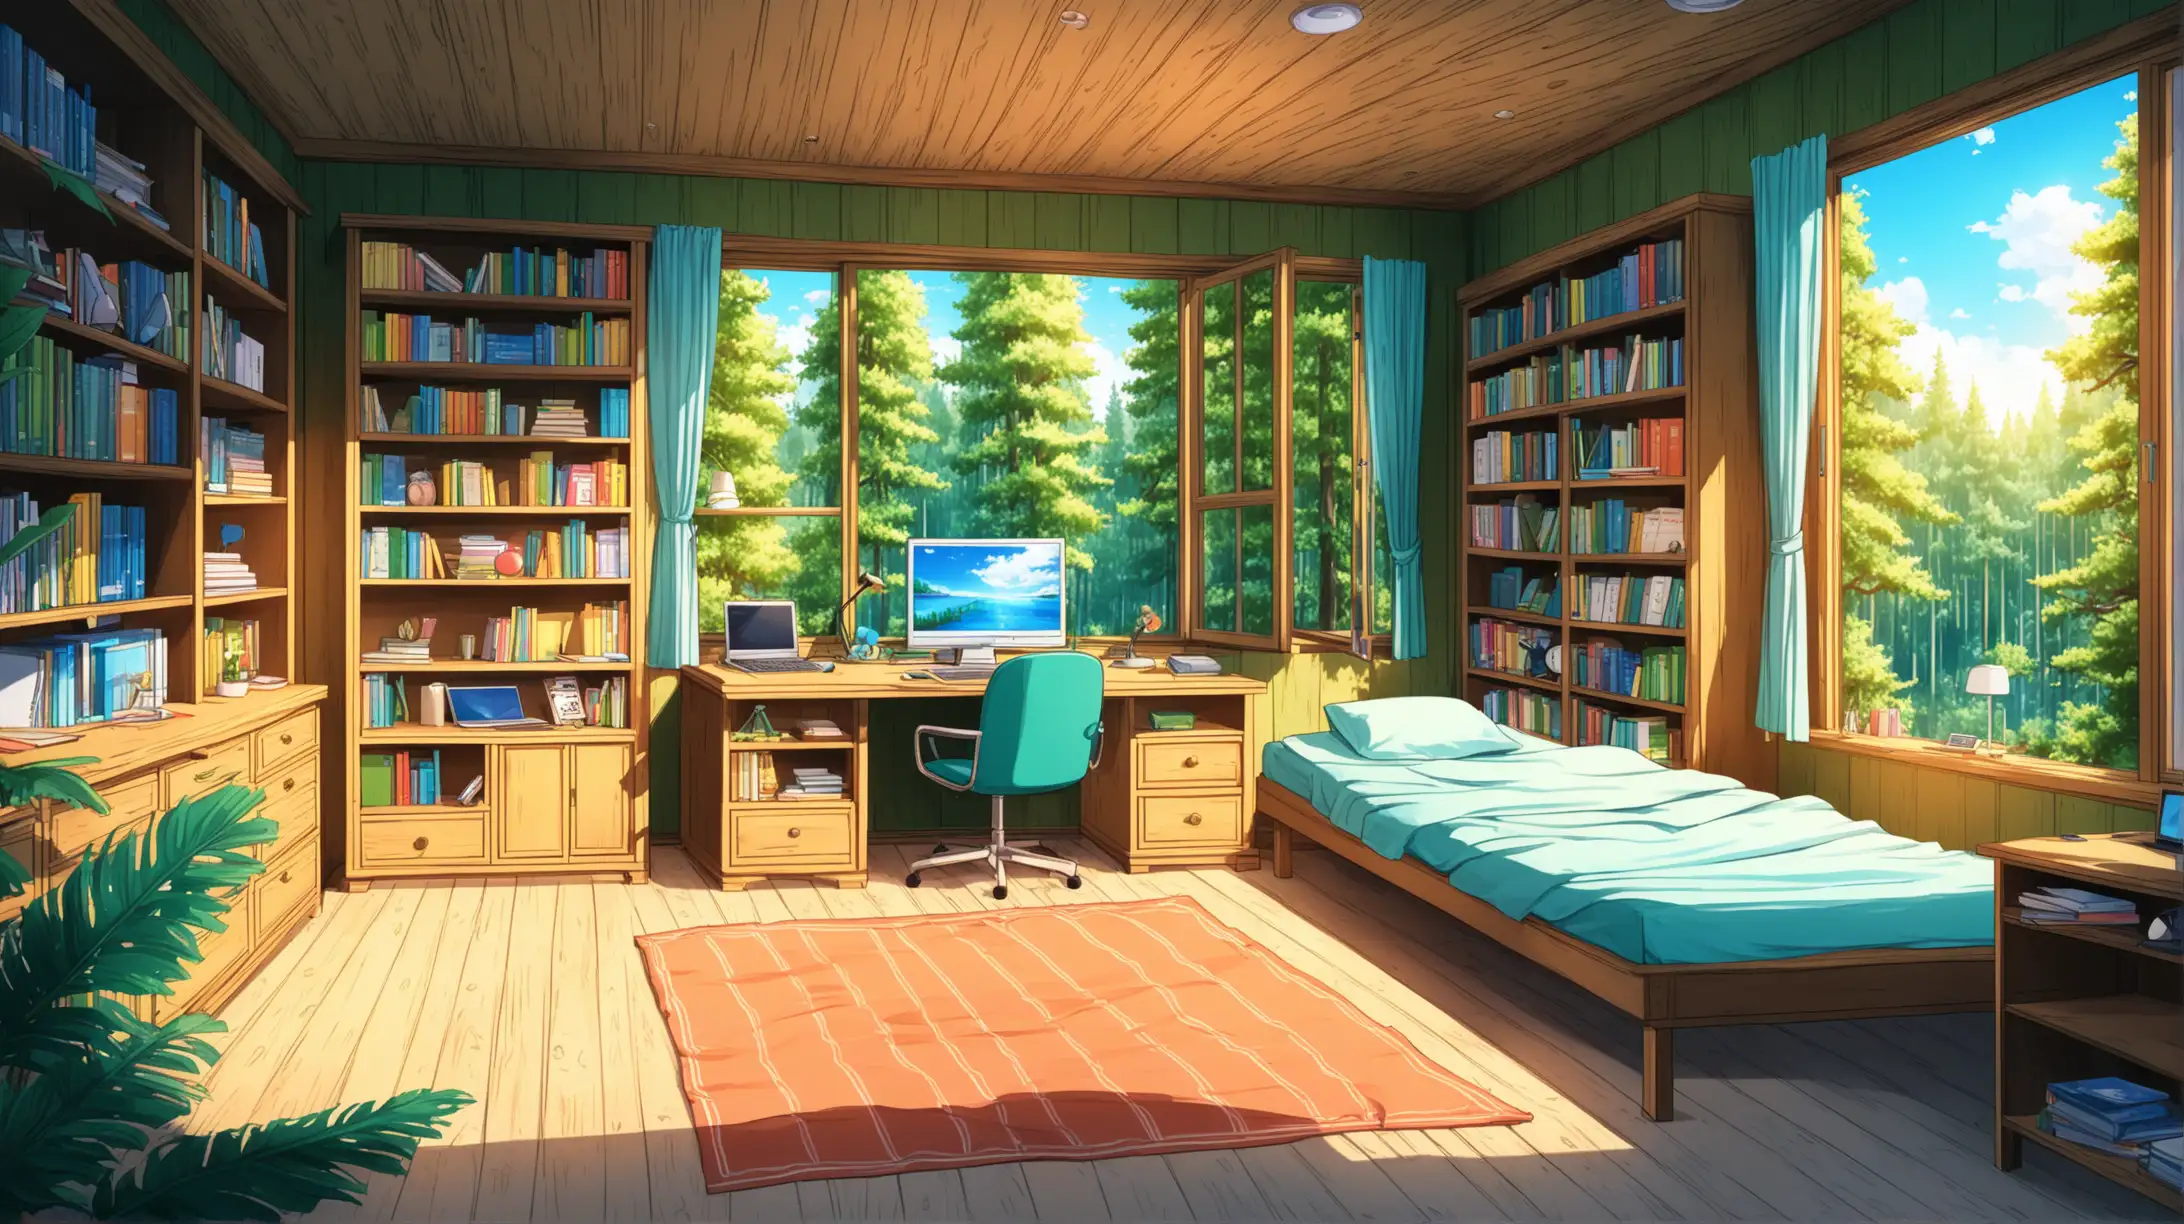 Illustration of a Computer Desk in a Forest Room with Summer Break Vibes